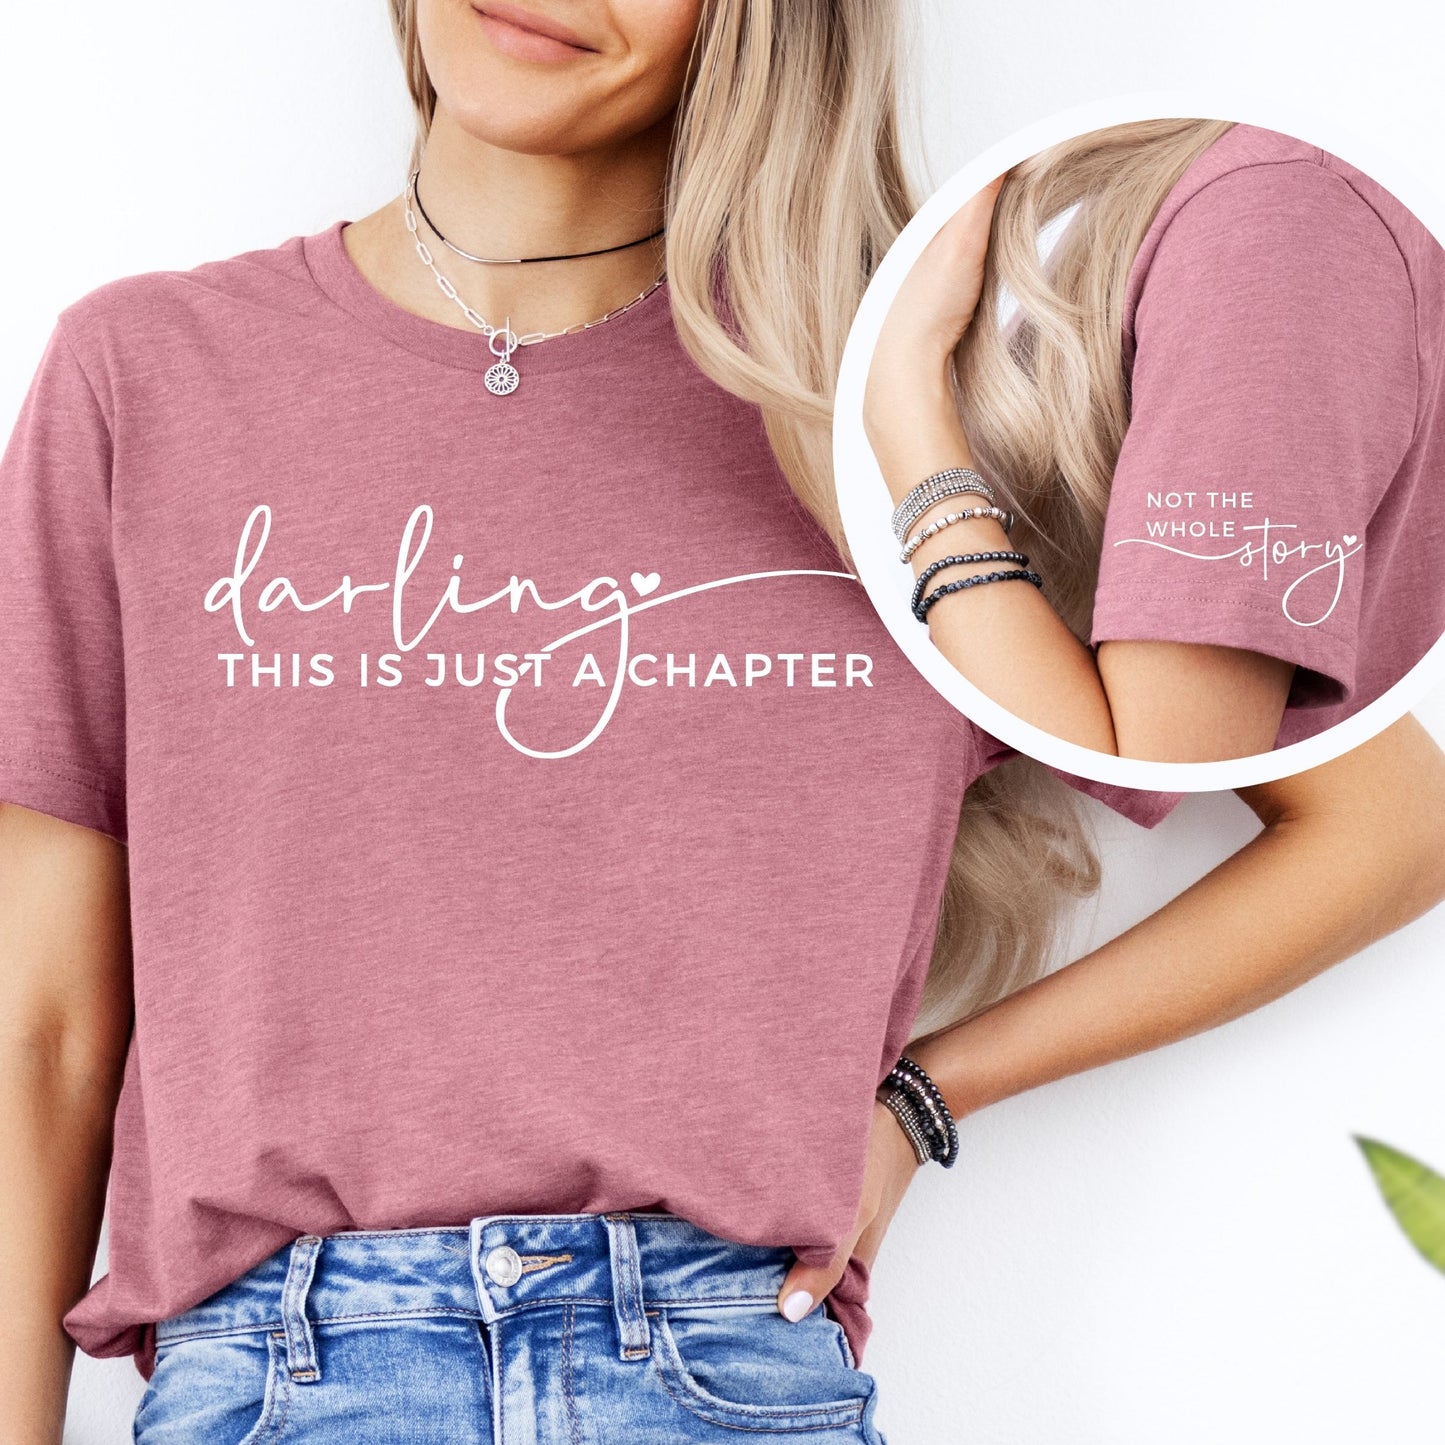 Darling This Is Just A Chapter T-Shirt - Mardonyx T-Shirt XS / Heather Mauve